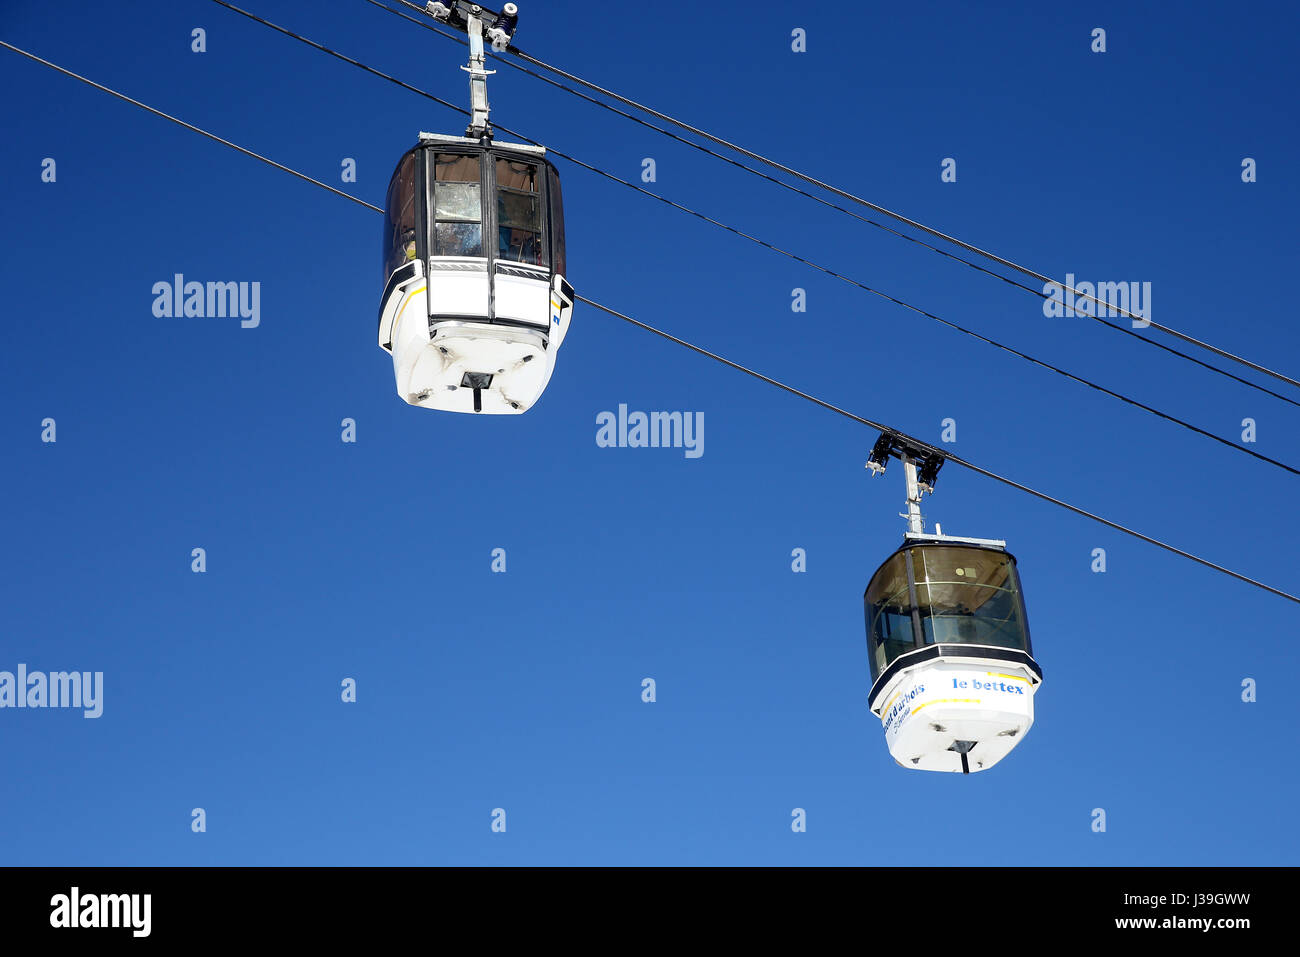 French alps. skiing and overhead cable car. Stock Photo